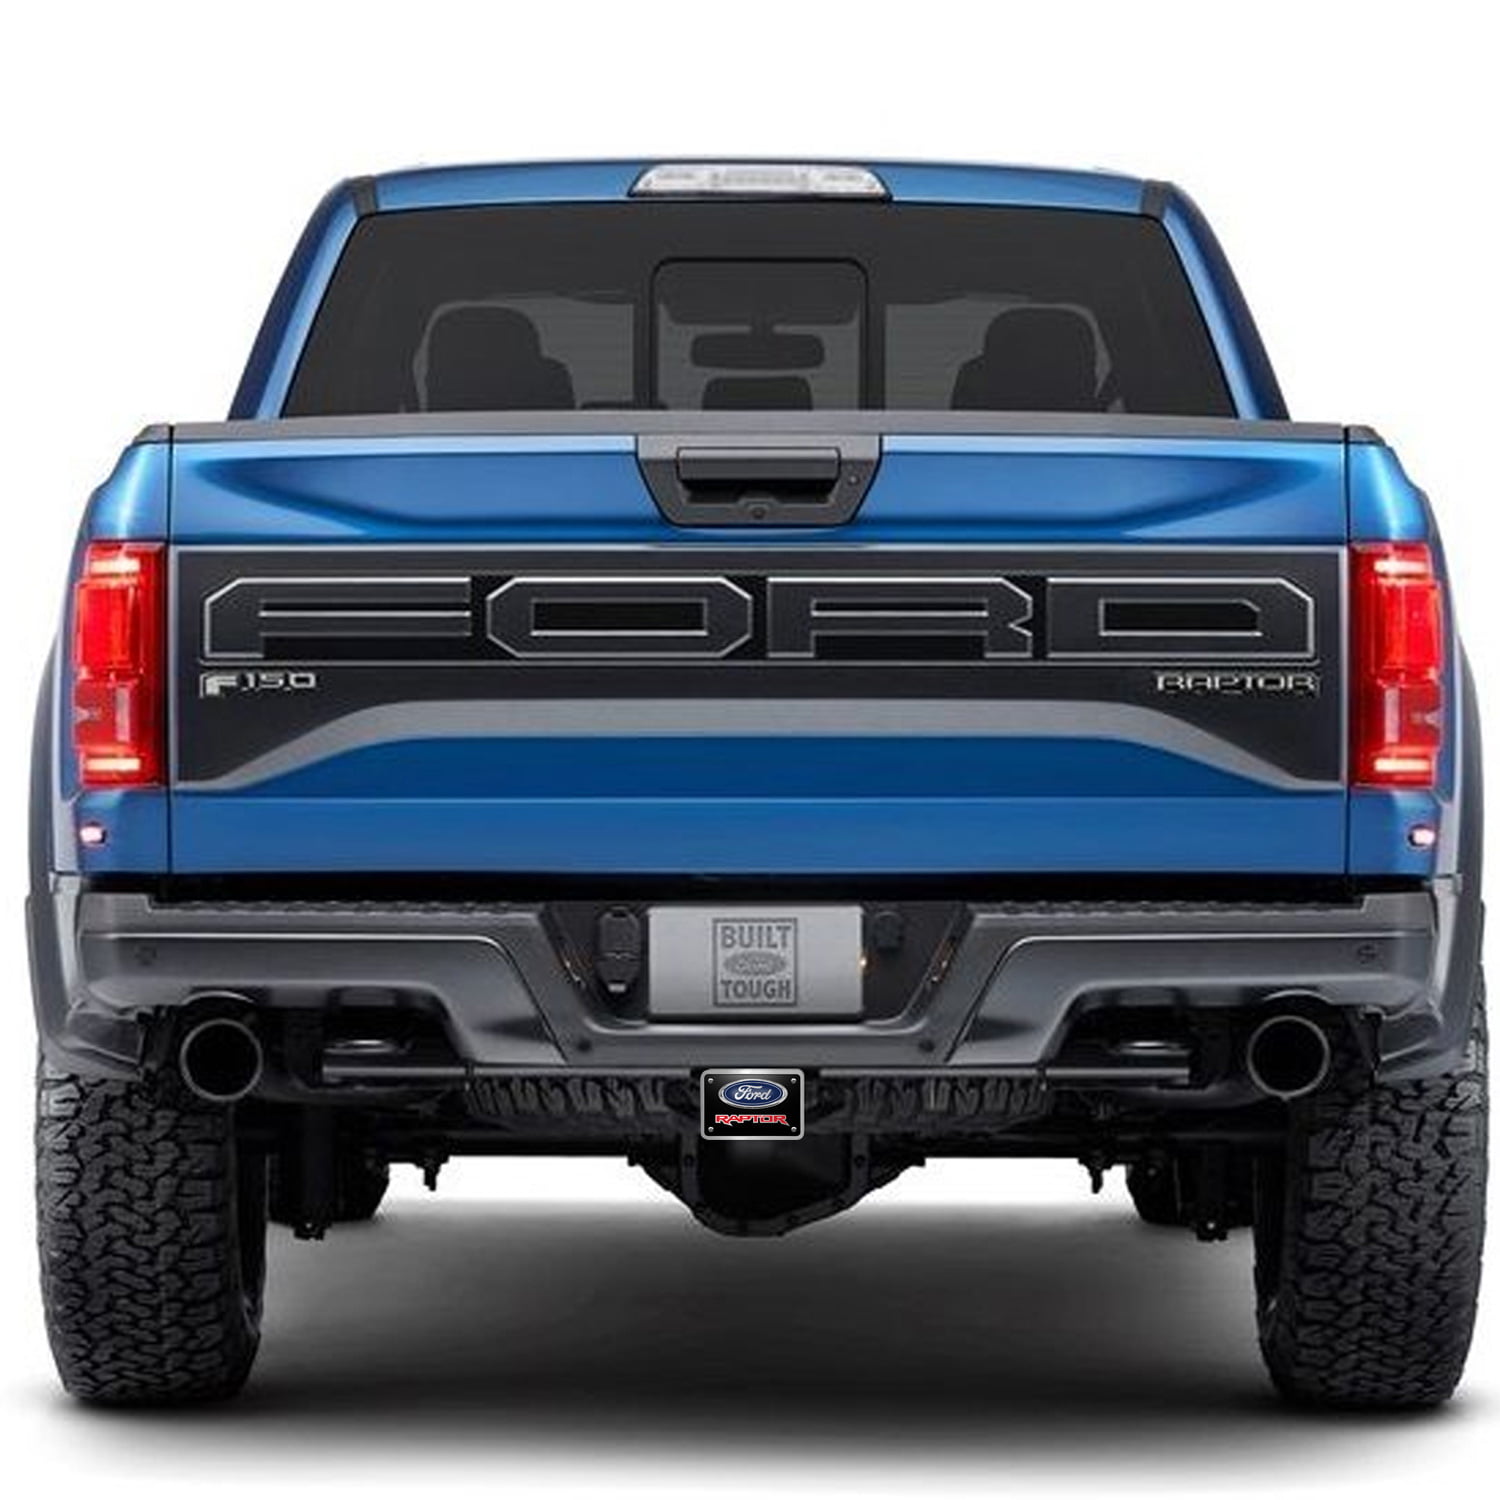 Ford Raptor in Red 3D Black 38 Thick Solid Billet Aluminum Tow Hitch Cover